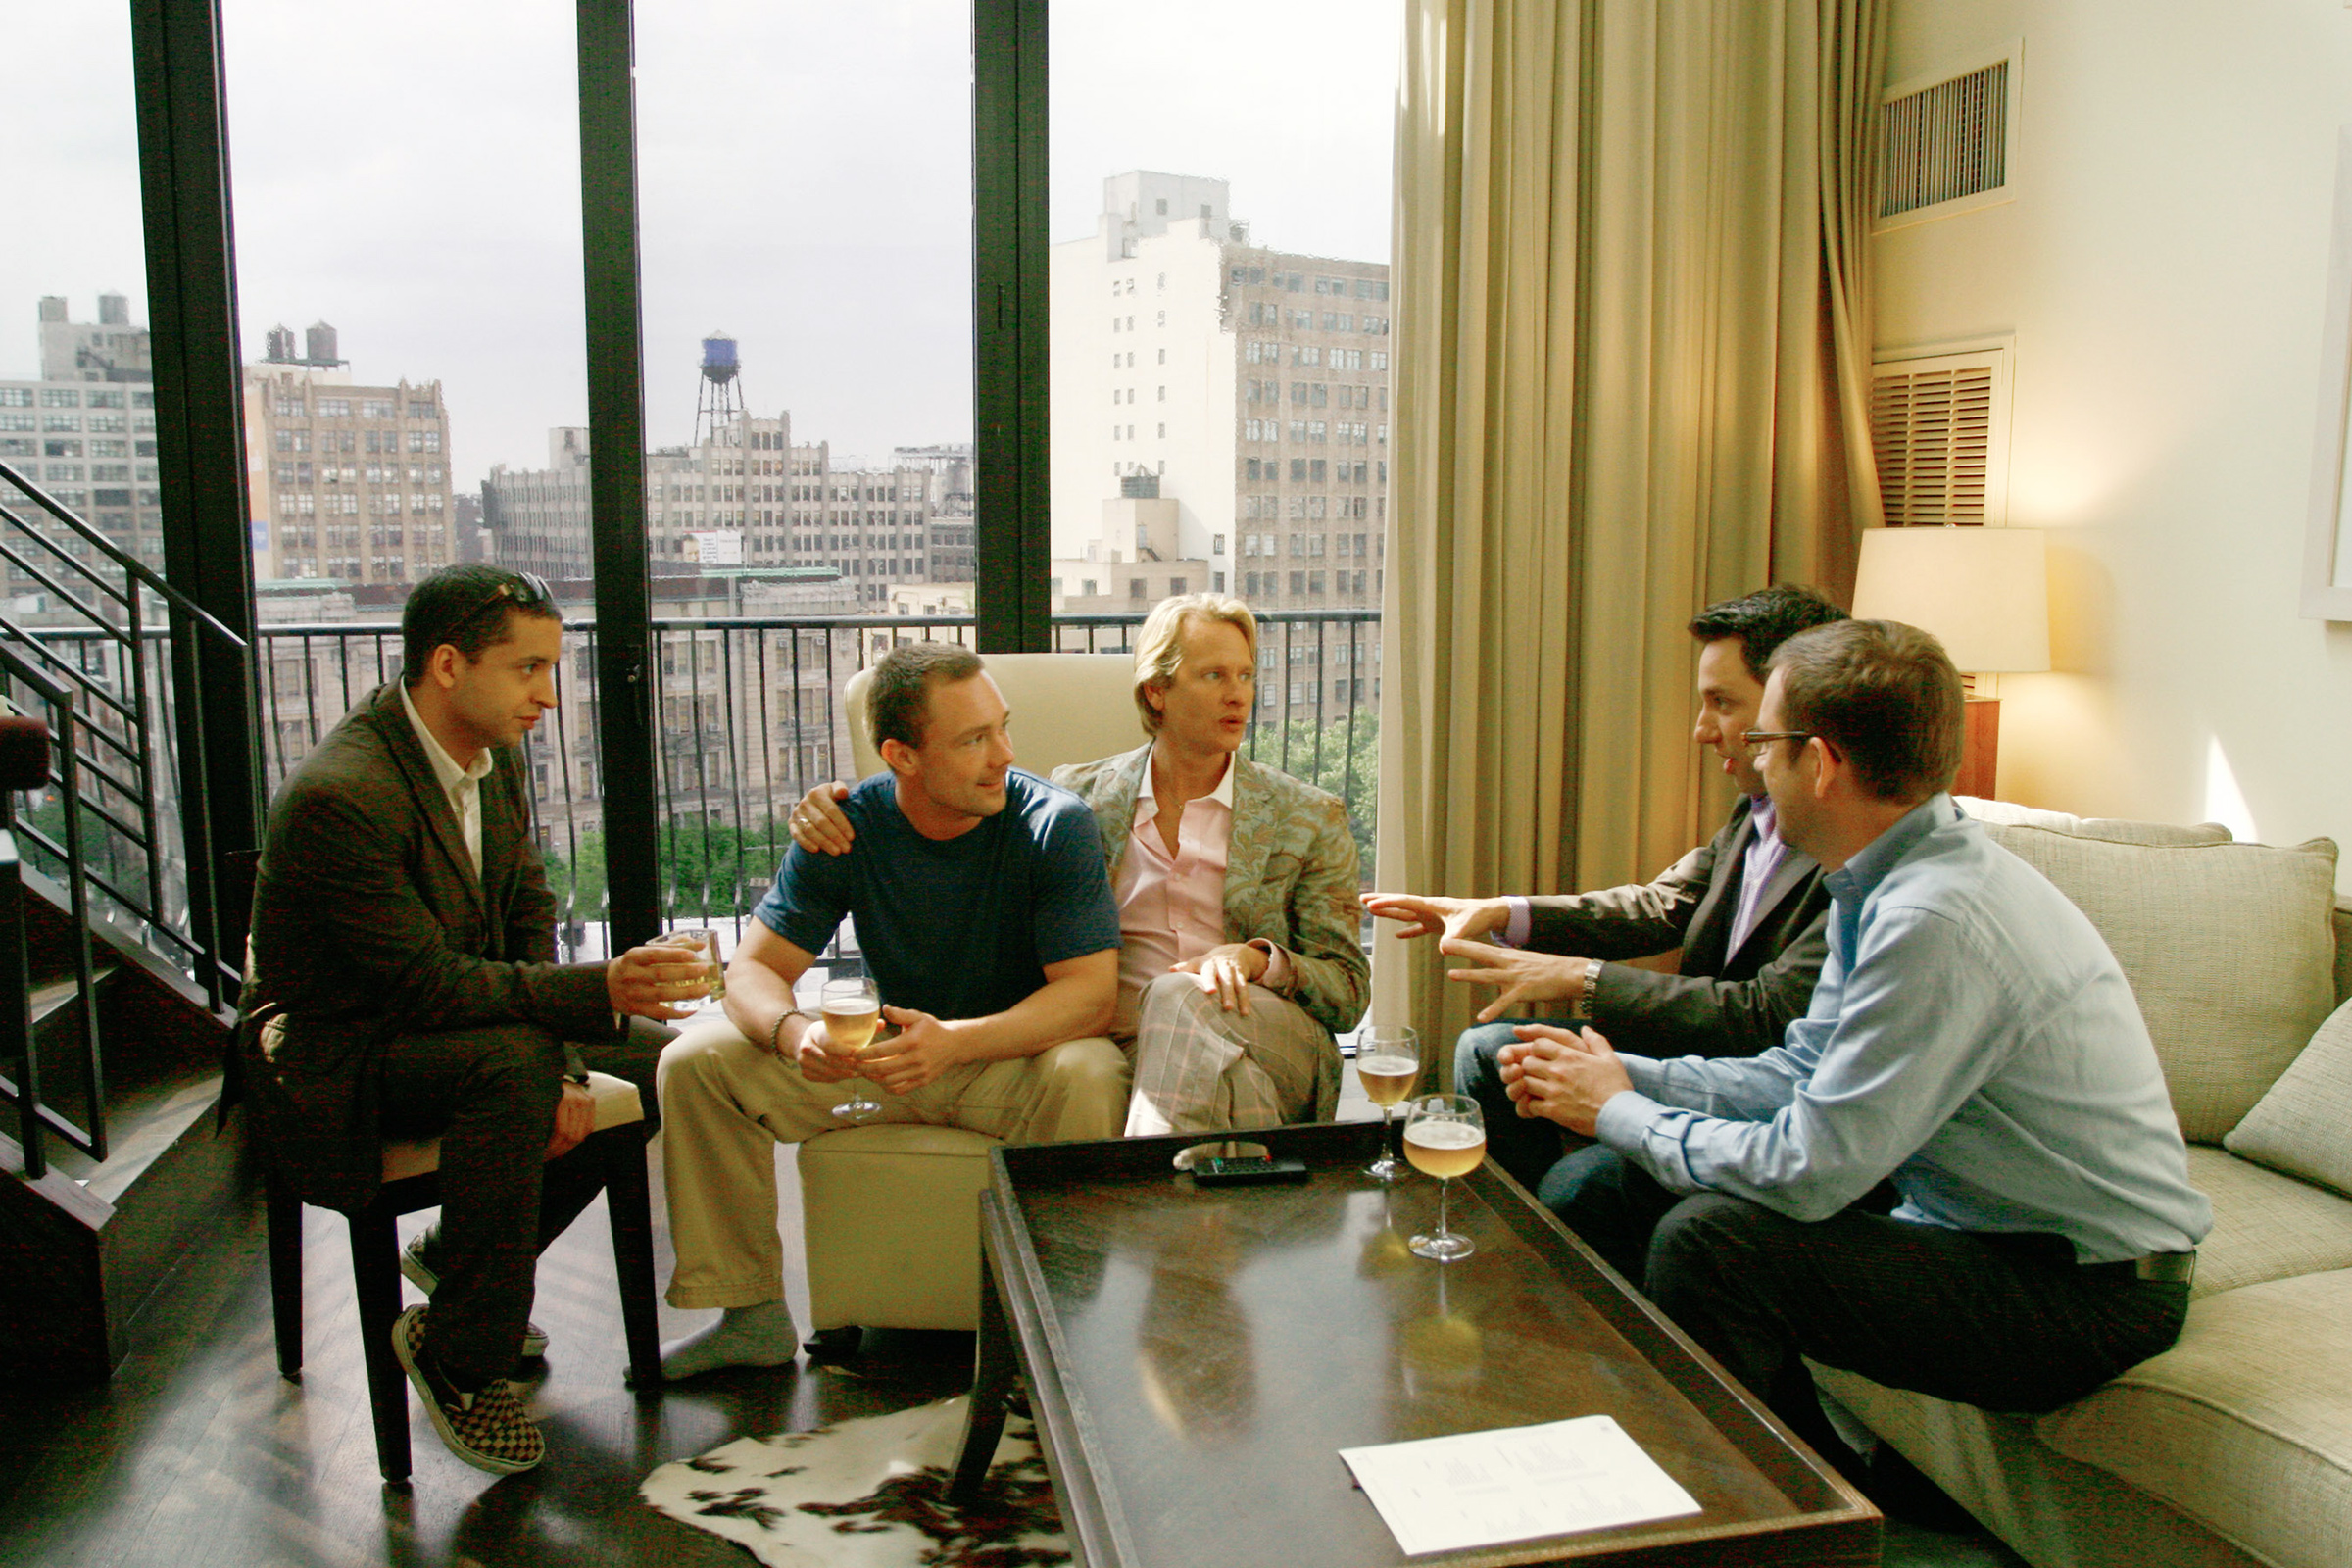 The final season of 'Queer Eye for the Straight Guy' ran in 2007. (Everett Collection)